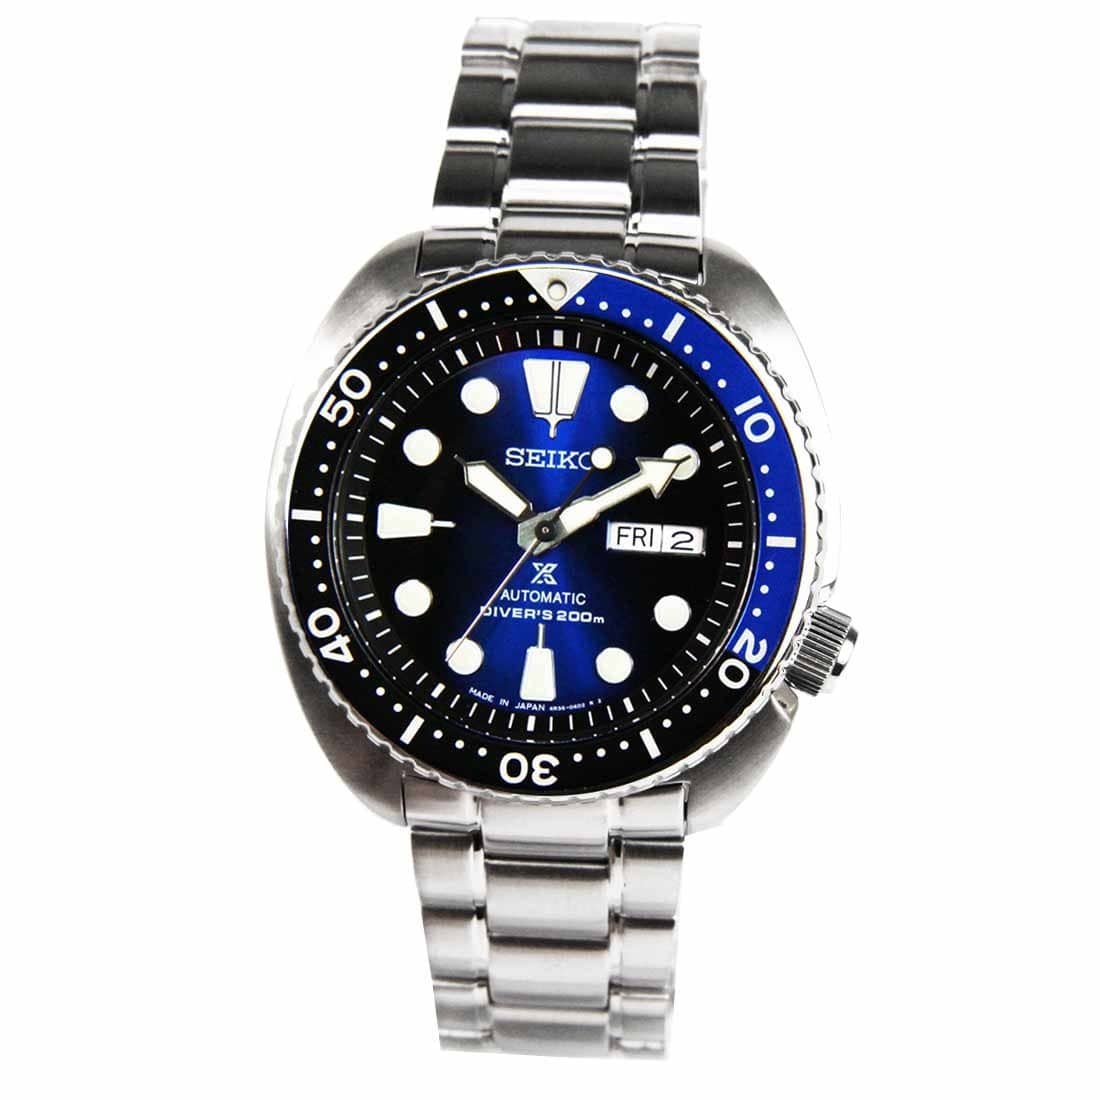 SRPC25J1 SRPC25 Seiko Prospex Turtle Automatic Stainless Steel Mens Dive Watch